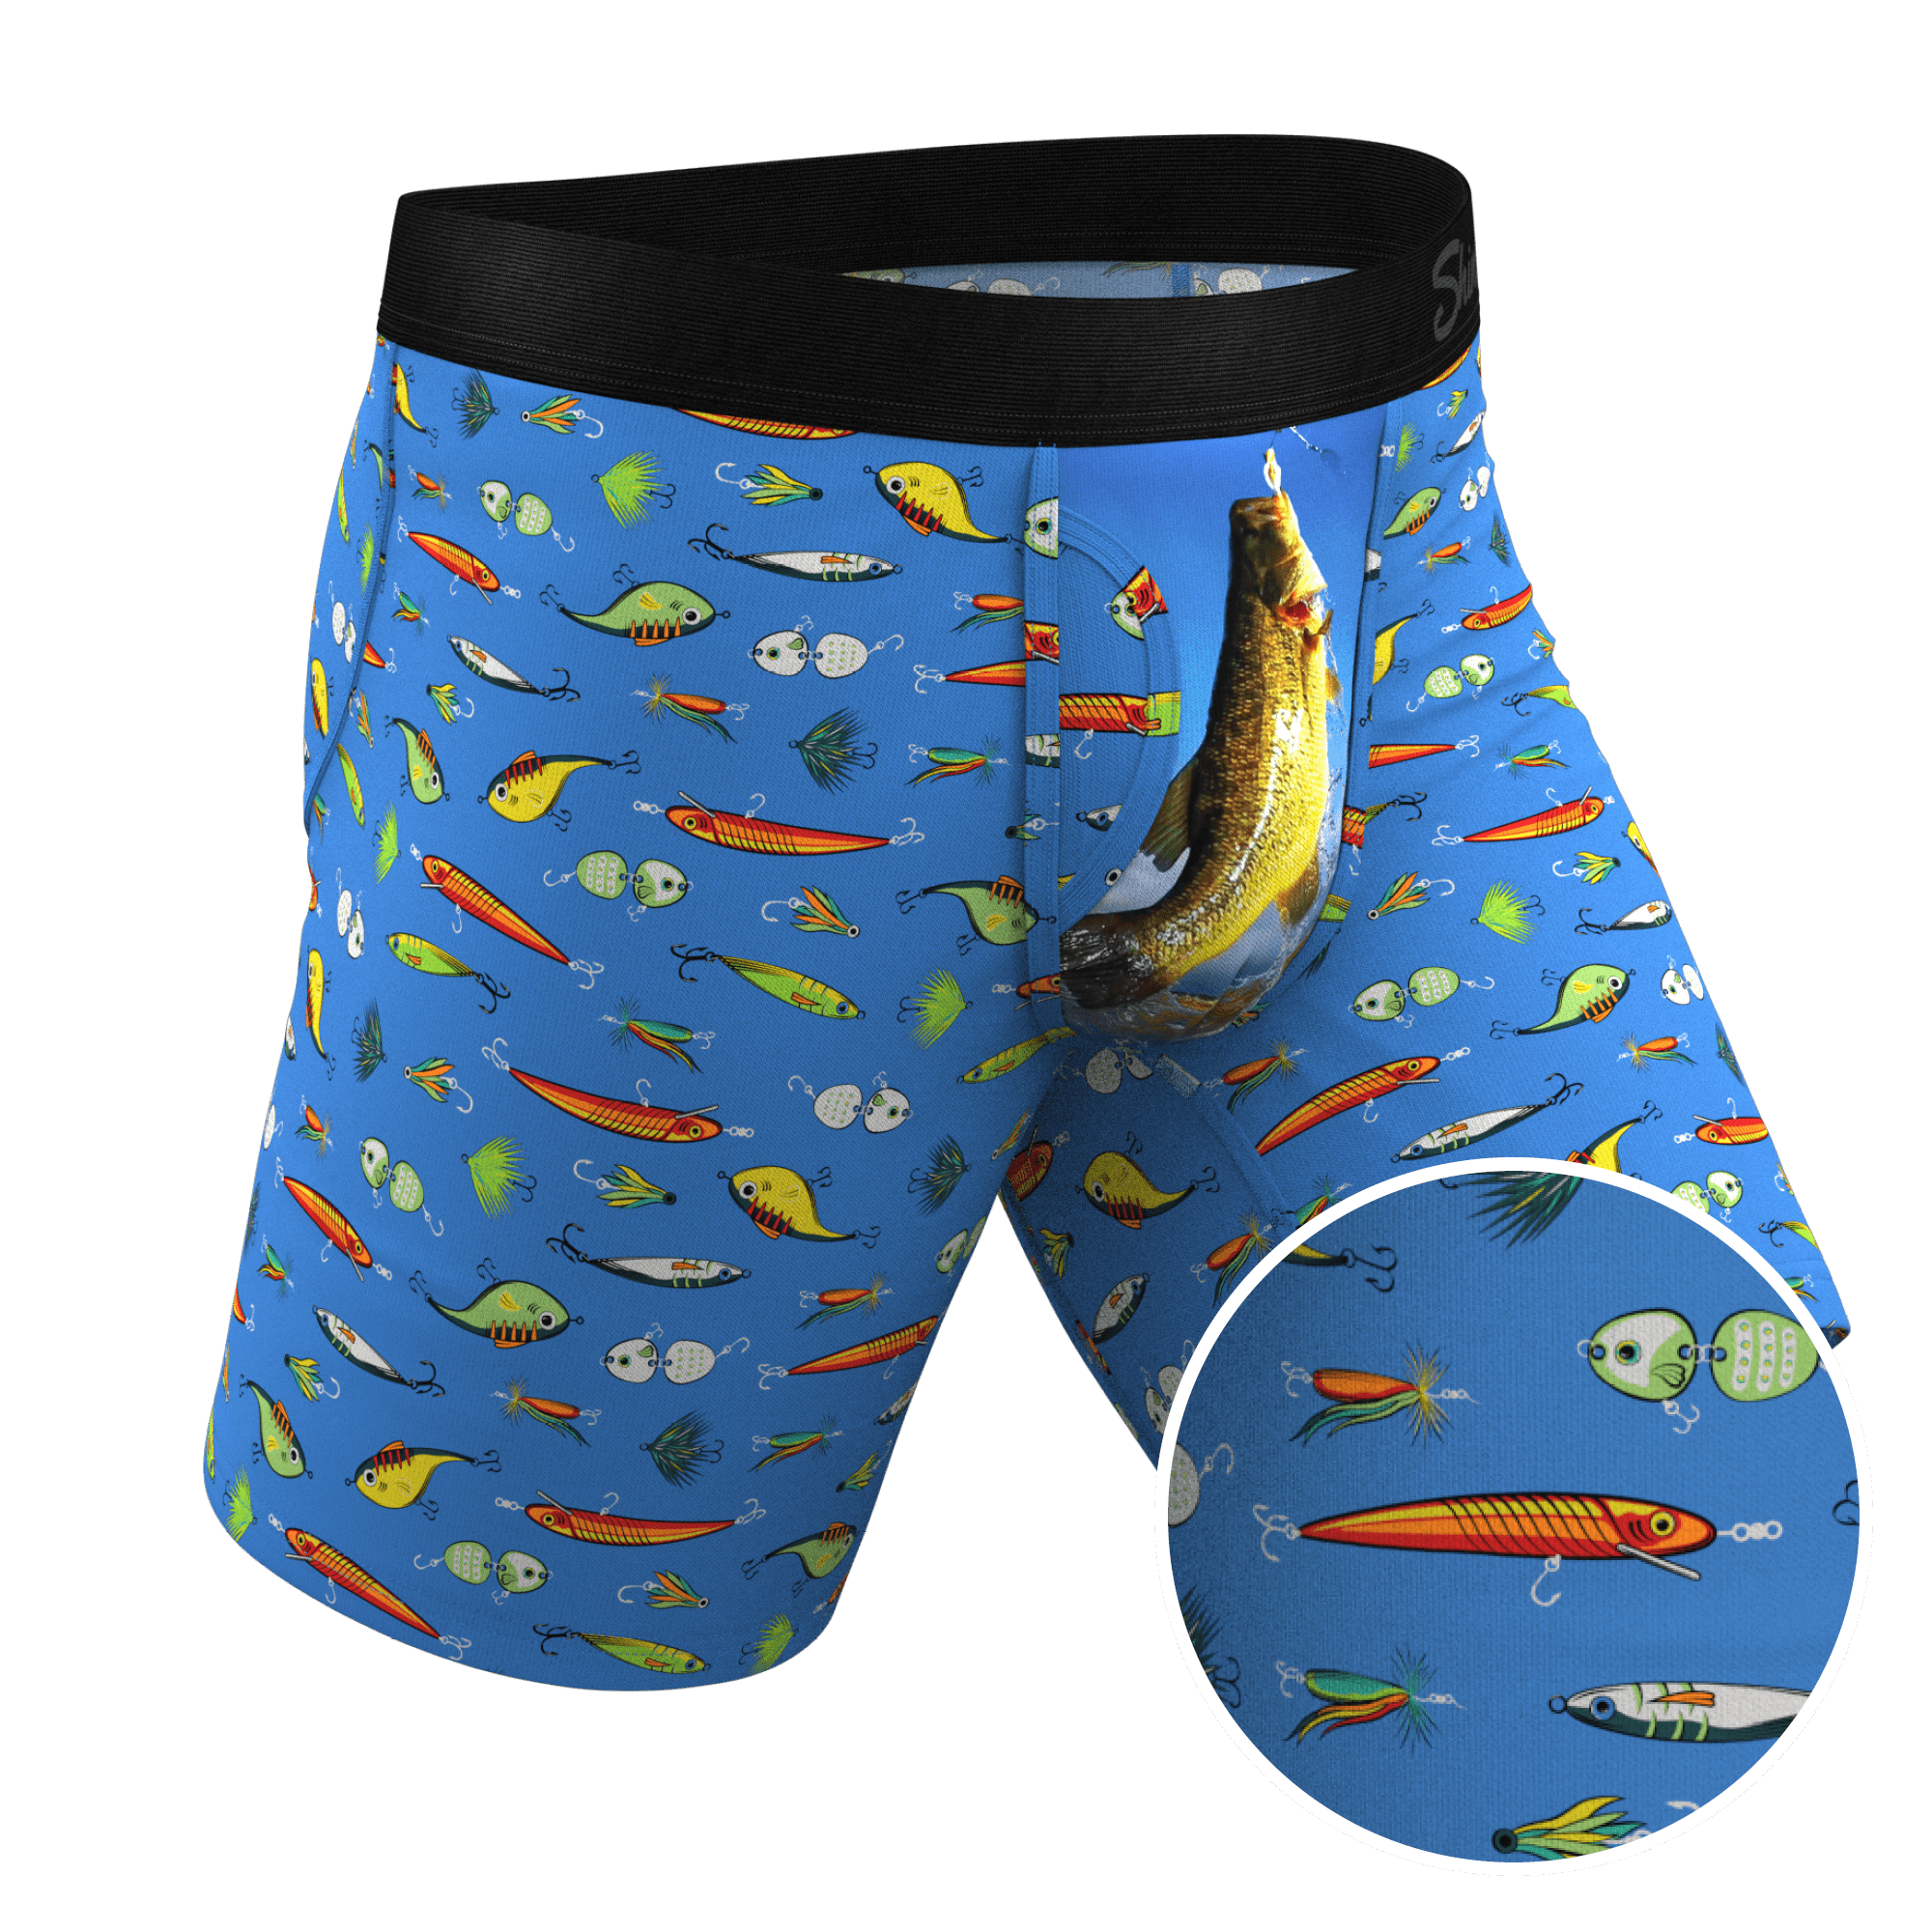 The Bait and Tackle - Shinesty Bass Ball Hammock Pouch Underwear